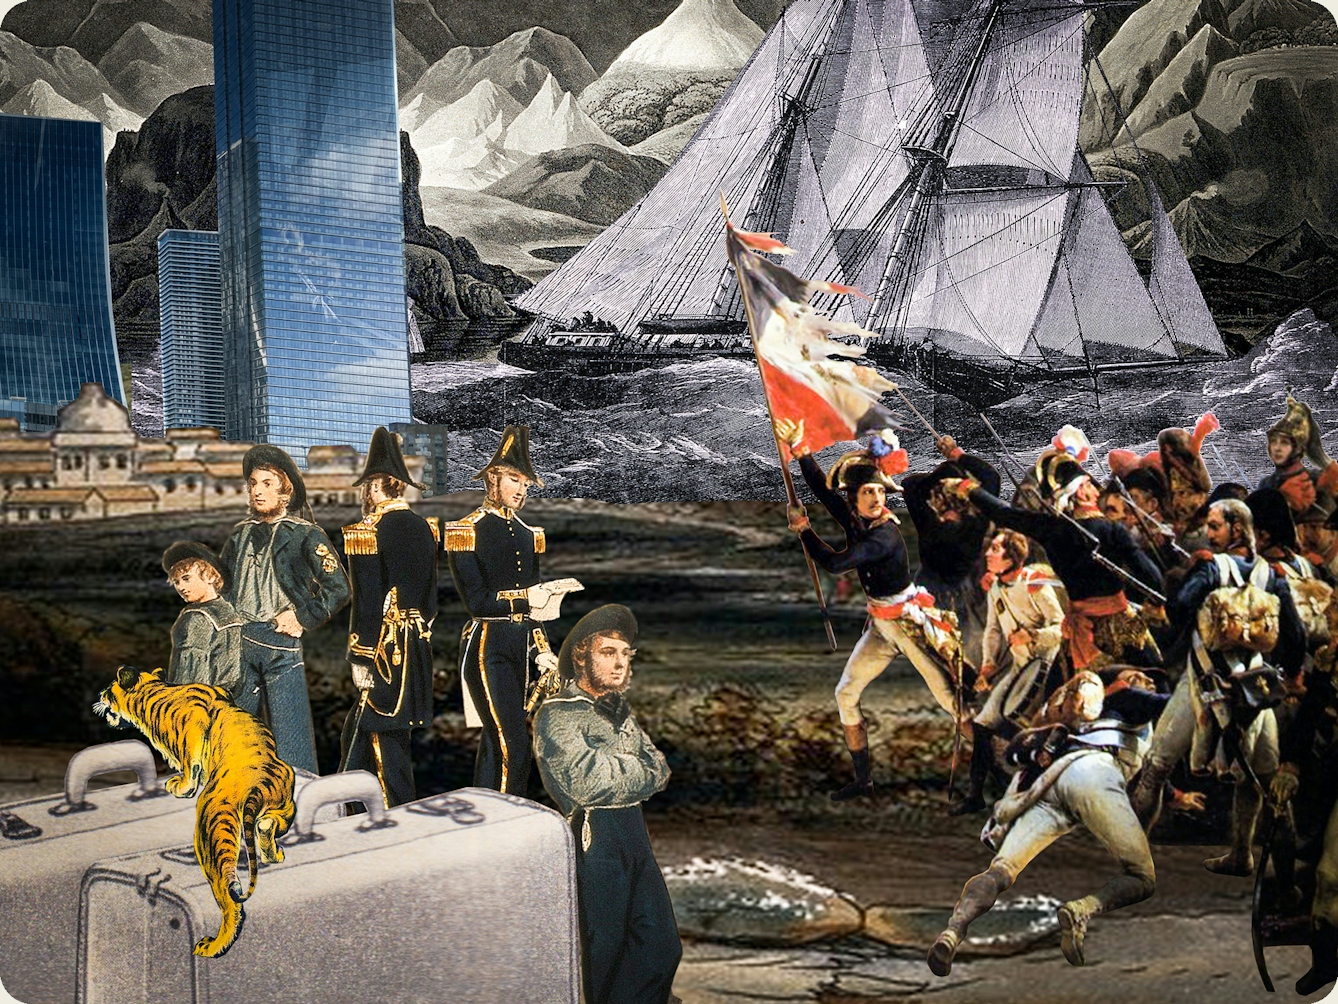 Artwork using collage.  The collaged elements are made up archive material which includes vintage photographs, etchings, painted illustrations, lithographic prints and line drawings. This artwork depicts a scene with an urban and rural combined background, where high snow covered mountain peaks rise in the distance. To the left in the foreground are a couple of suitcases over which a tiger is crawling. Next to the suitcases a group of sailors are standing. To the far right a group of french revolutionary soldiers surge forward with a tattered flag. Behind them a tall ship in full sail crosses a section of ocean.